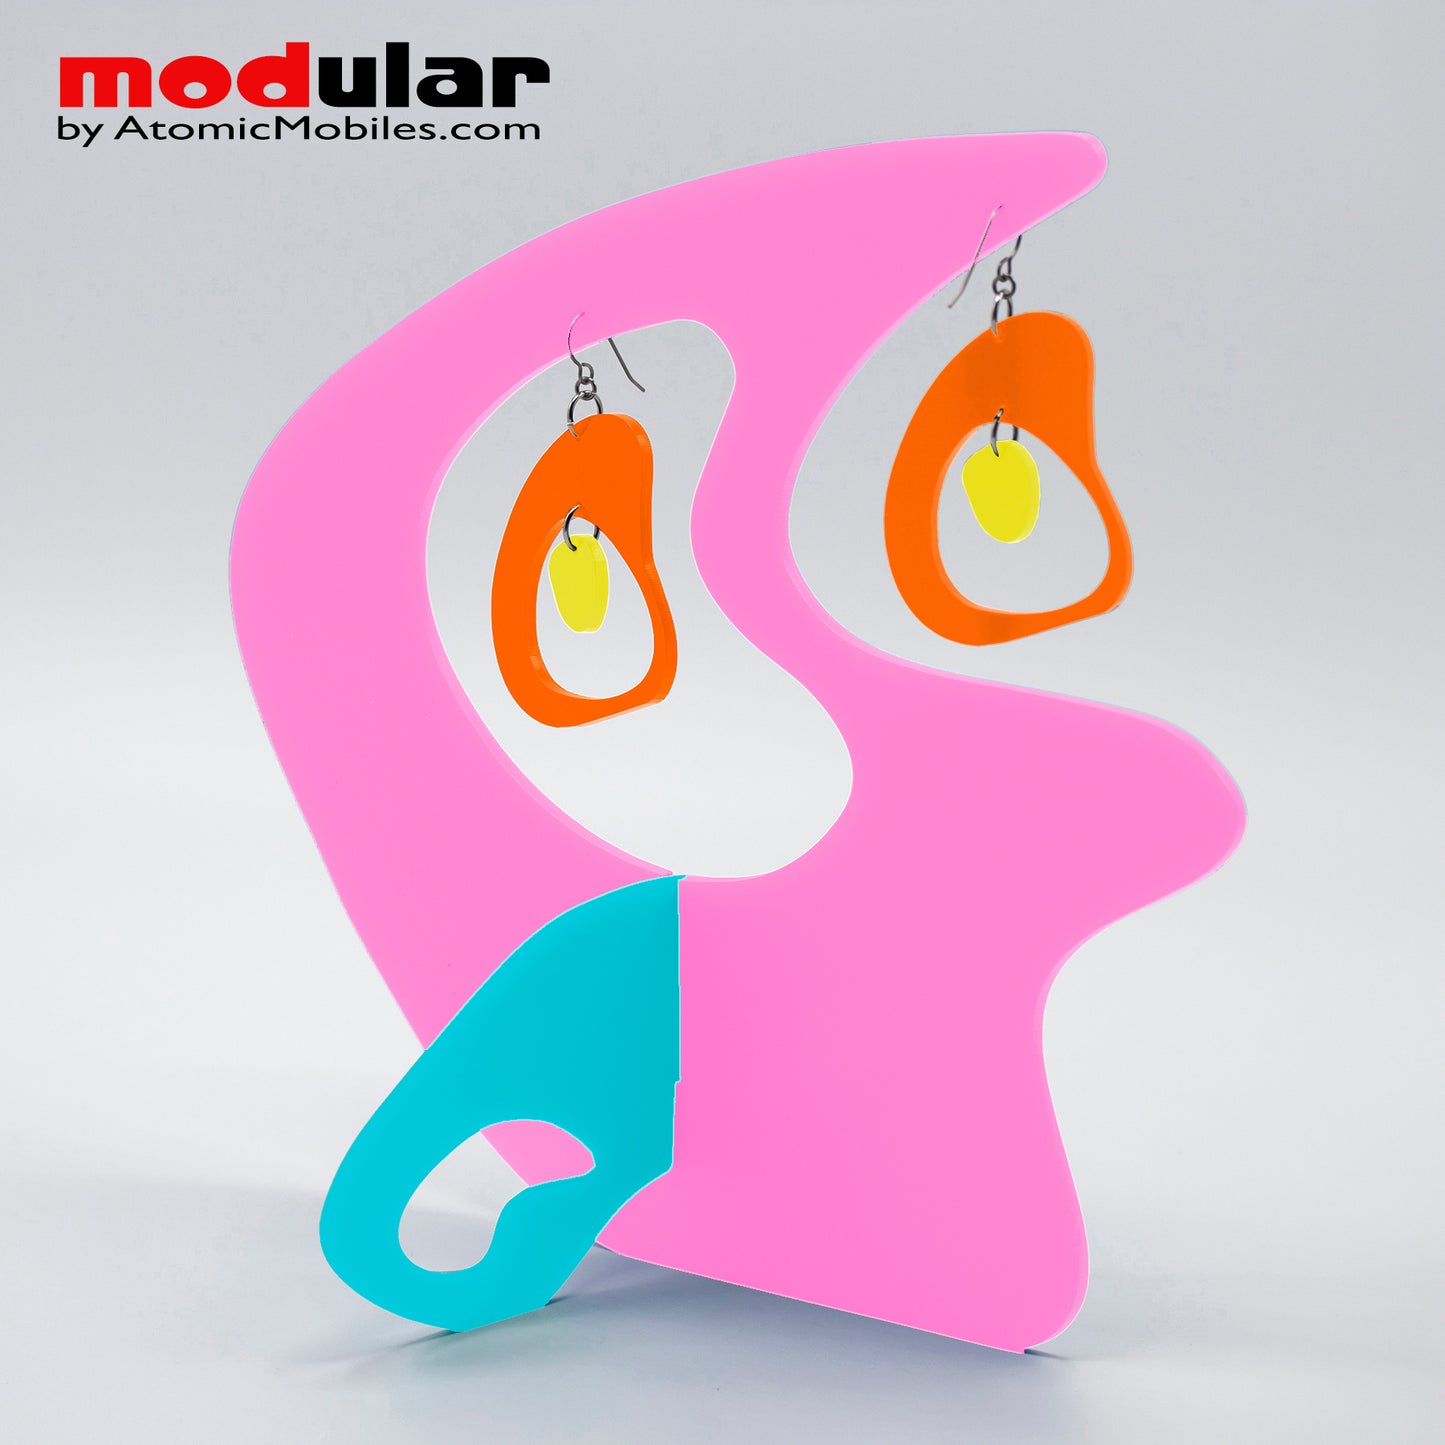 Handmade Boomerang Retro style earrings and stabile kinetic modern art sculpture in Hot Pink Orange Aqua and Yellow by AtomicMobiles.com